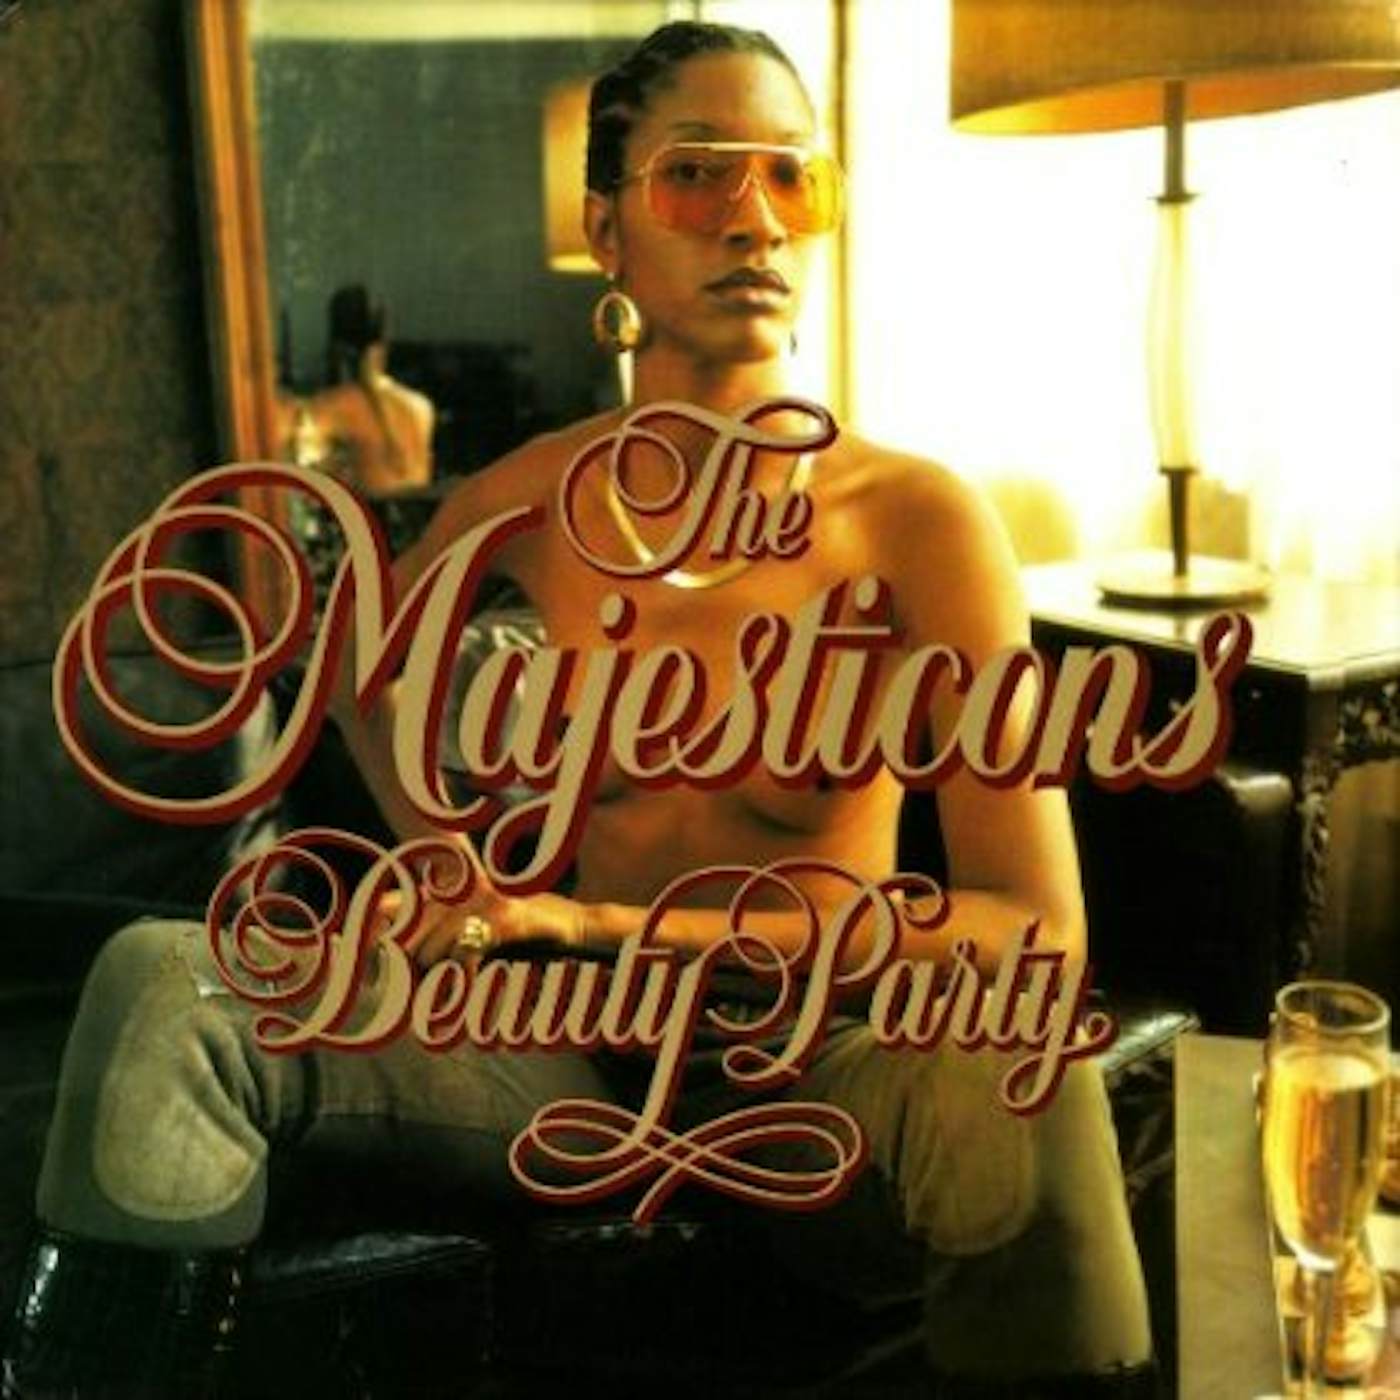 The Majesticons Beauty Party Vinyl Record